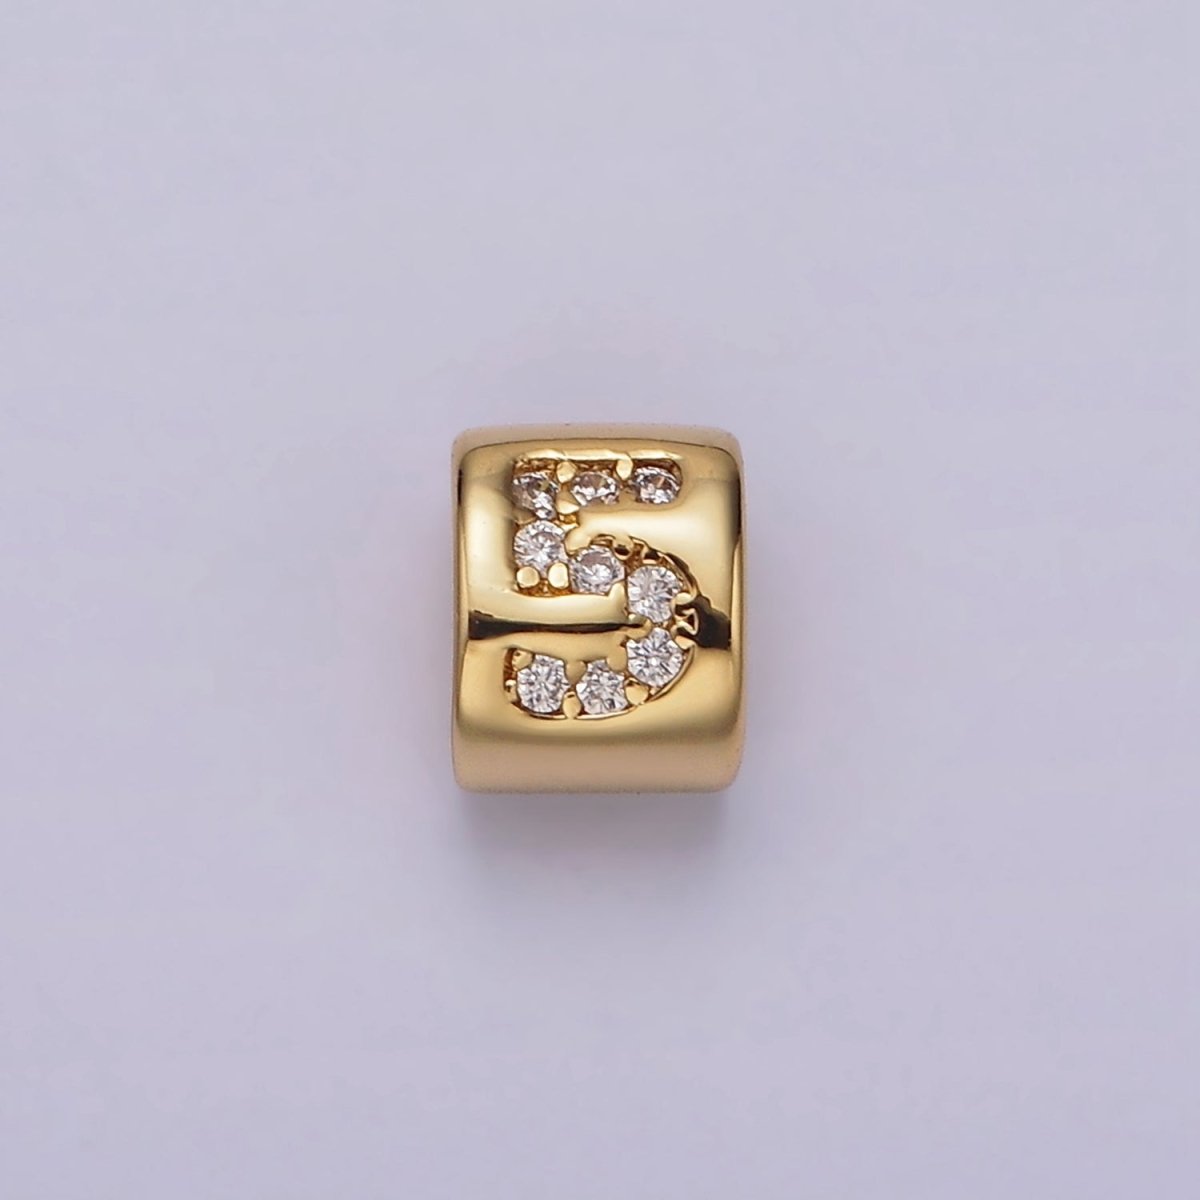 14K Gold Filled 0-9 Number Clear Micro Paved CZ Slider Bead Spacer | B-802 - B-811 - DLUXCA